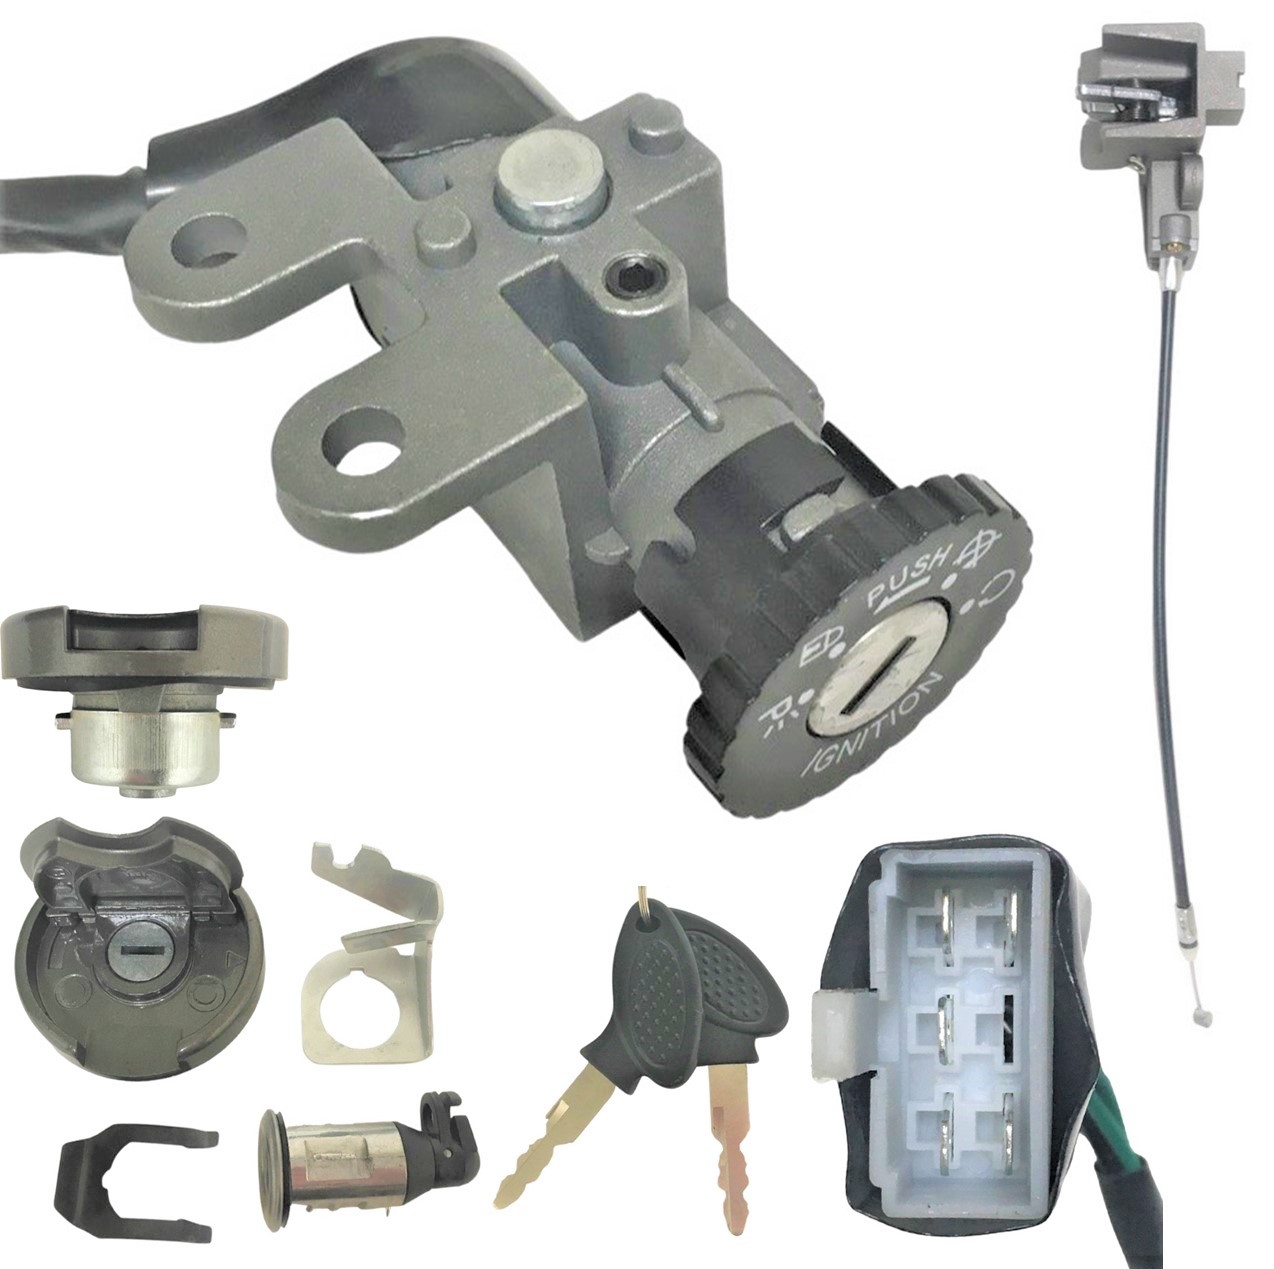 Ignition Switch Set Fits Tao Tao ATM50, Baja SC50S-345 + Many 49-150cc Chinese Scooters 5 Pins in 6 Pin FM Jack Ign Bolts c/c=28 Latch Bolts c/c=55 - Click Image to Close